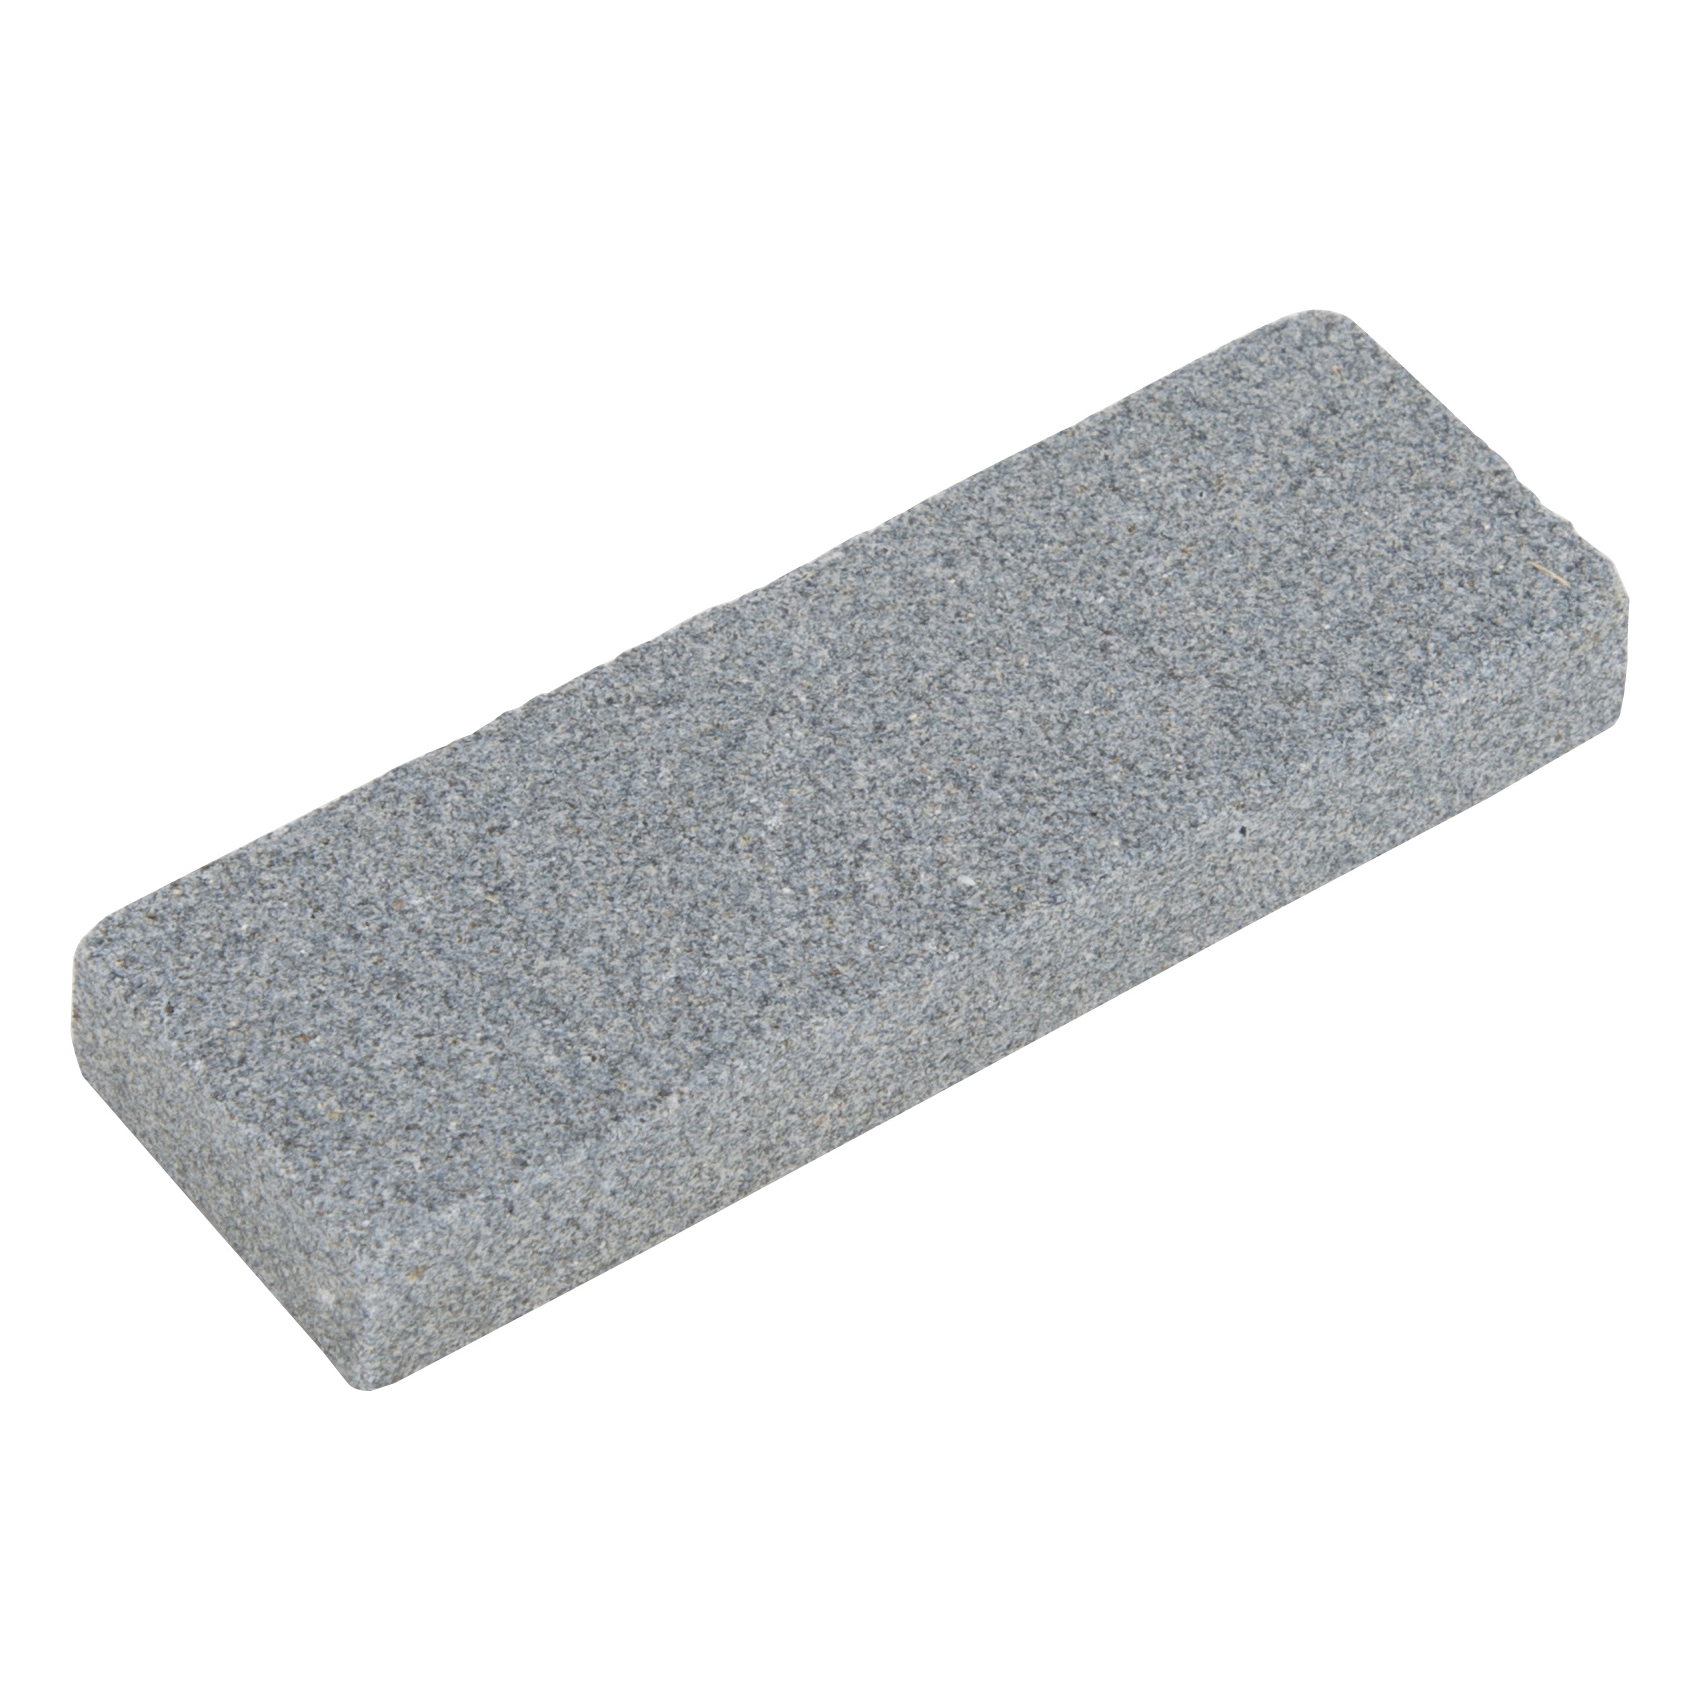 RC076-2 Sharpening Stone, 3 in L, 1 in W, 3/8 in Thick, 150 Grit, Coarse, Aluminum Oxide Abrasive